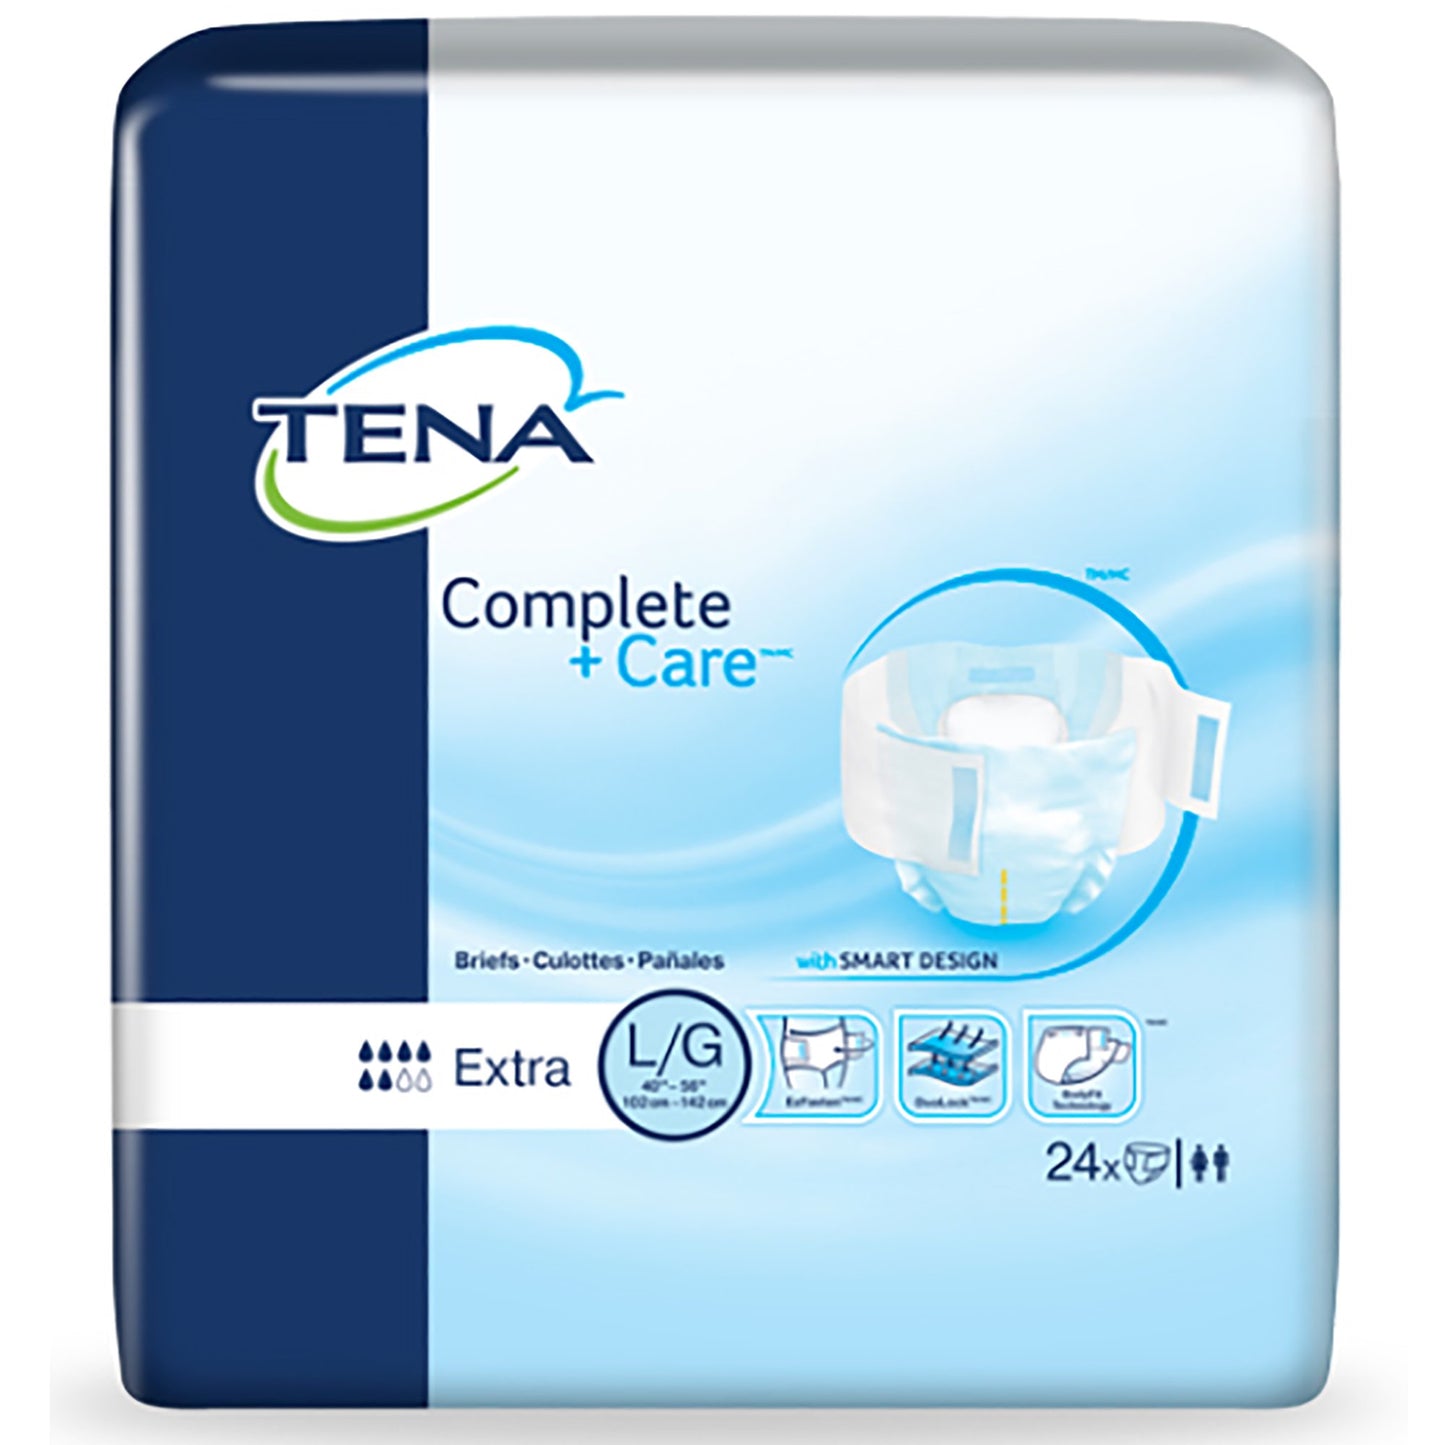 Tena® Complete +Care™ Extra Incontinence Brief, Large, 24 ct